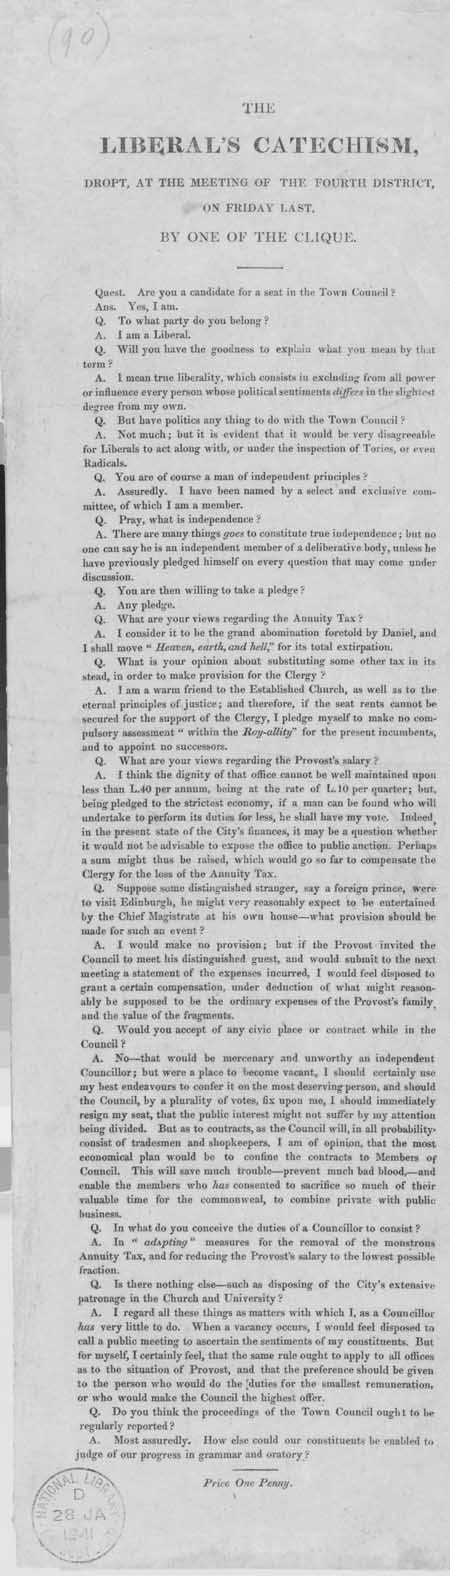 Broadside entitled 'The Liberal's Catechism, Dropt at the Meeting of the Fourth District, by One of the Clique'